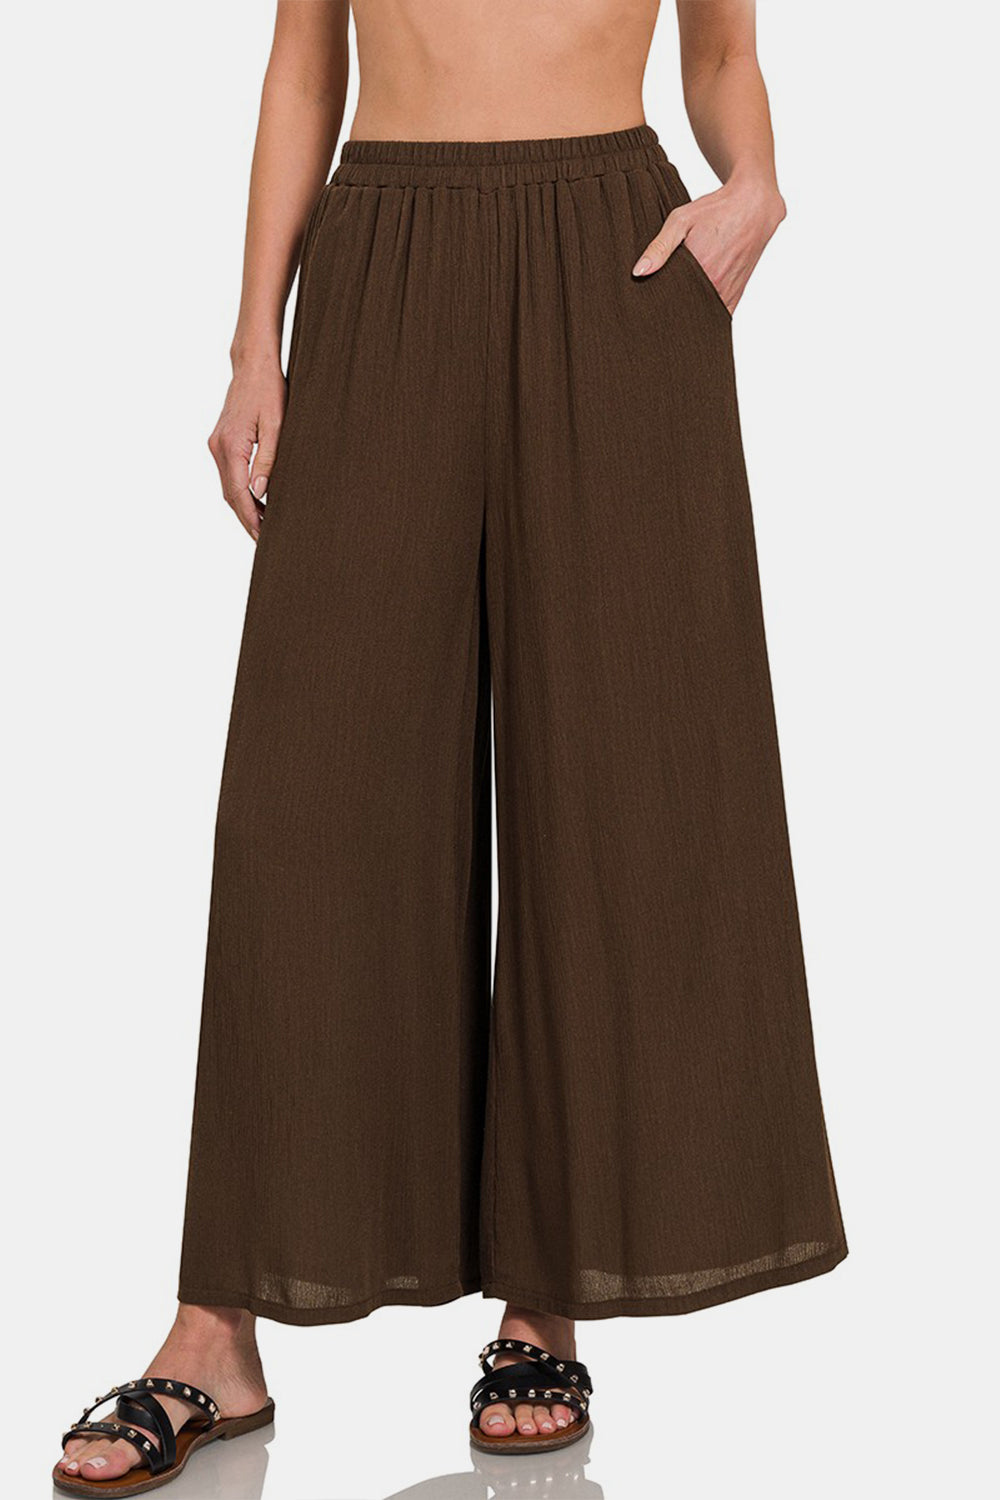 Woven Crinkle Wide Pants With Pockets